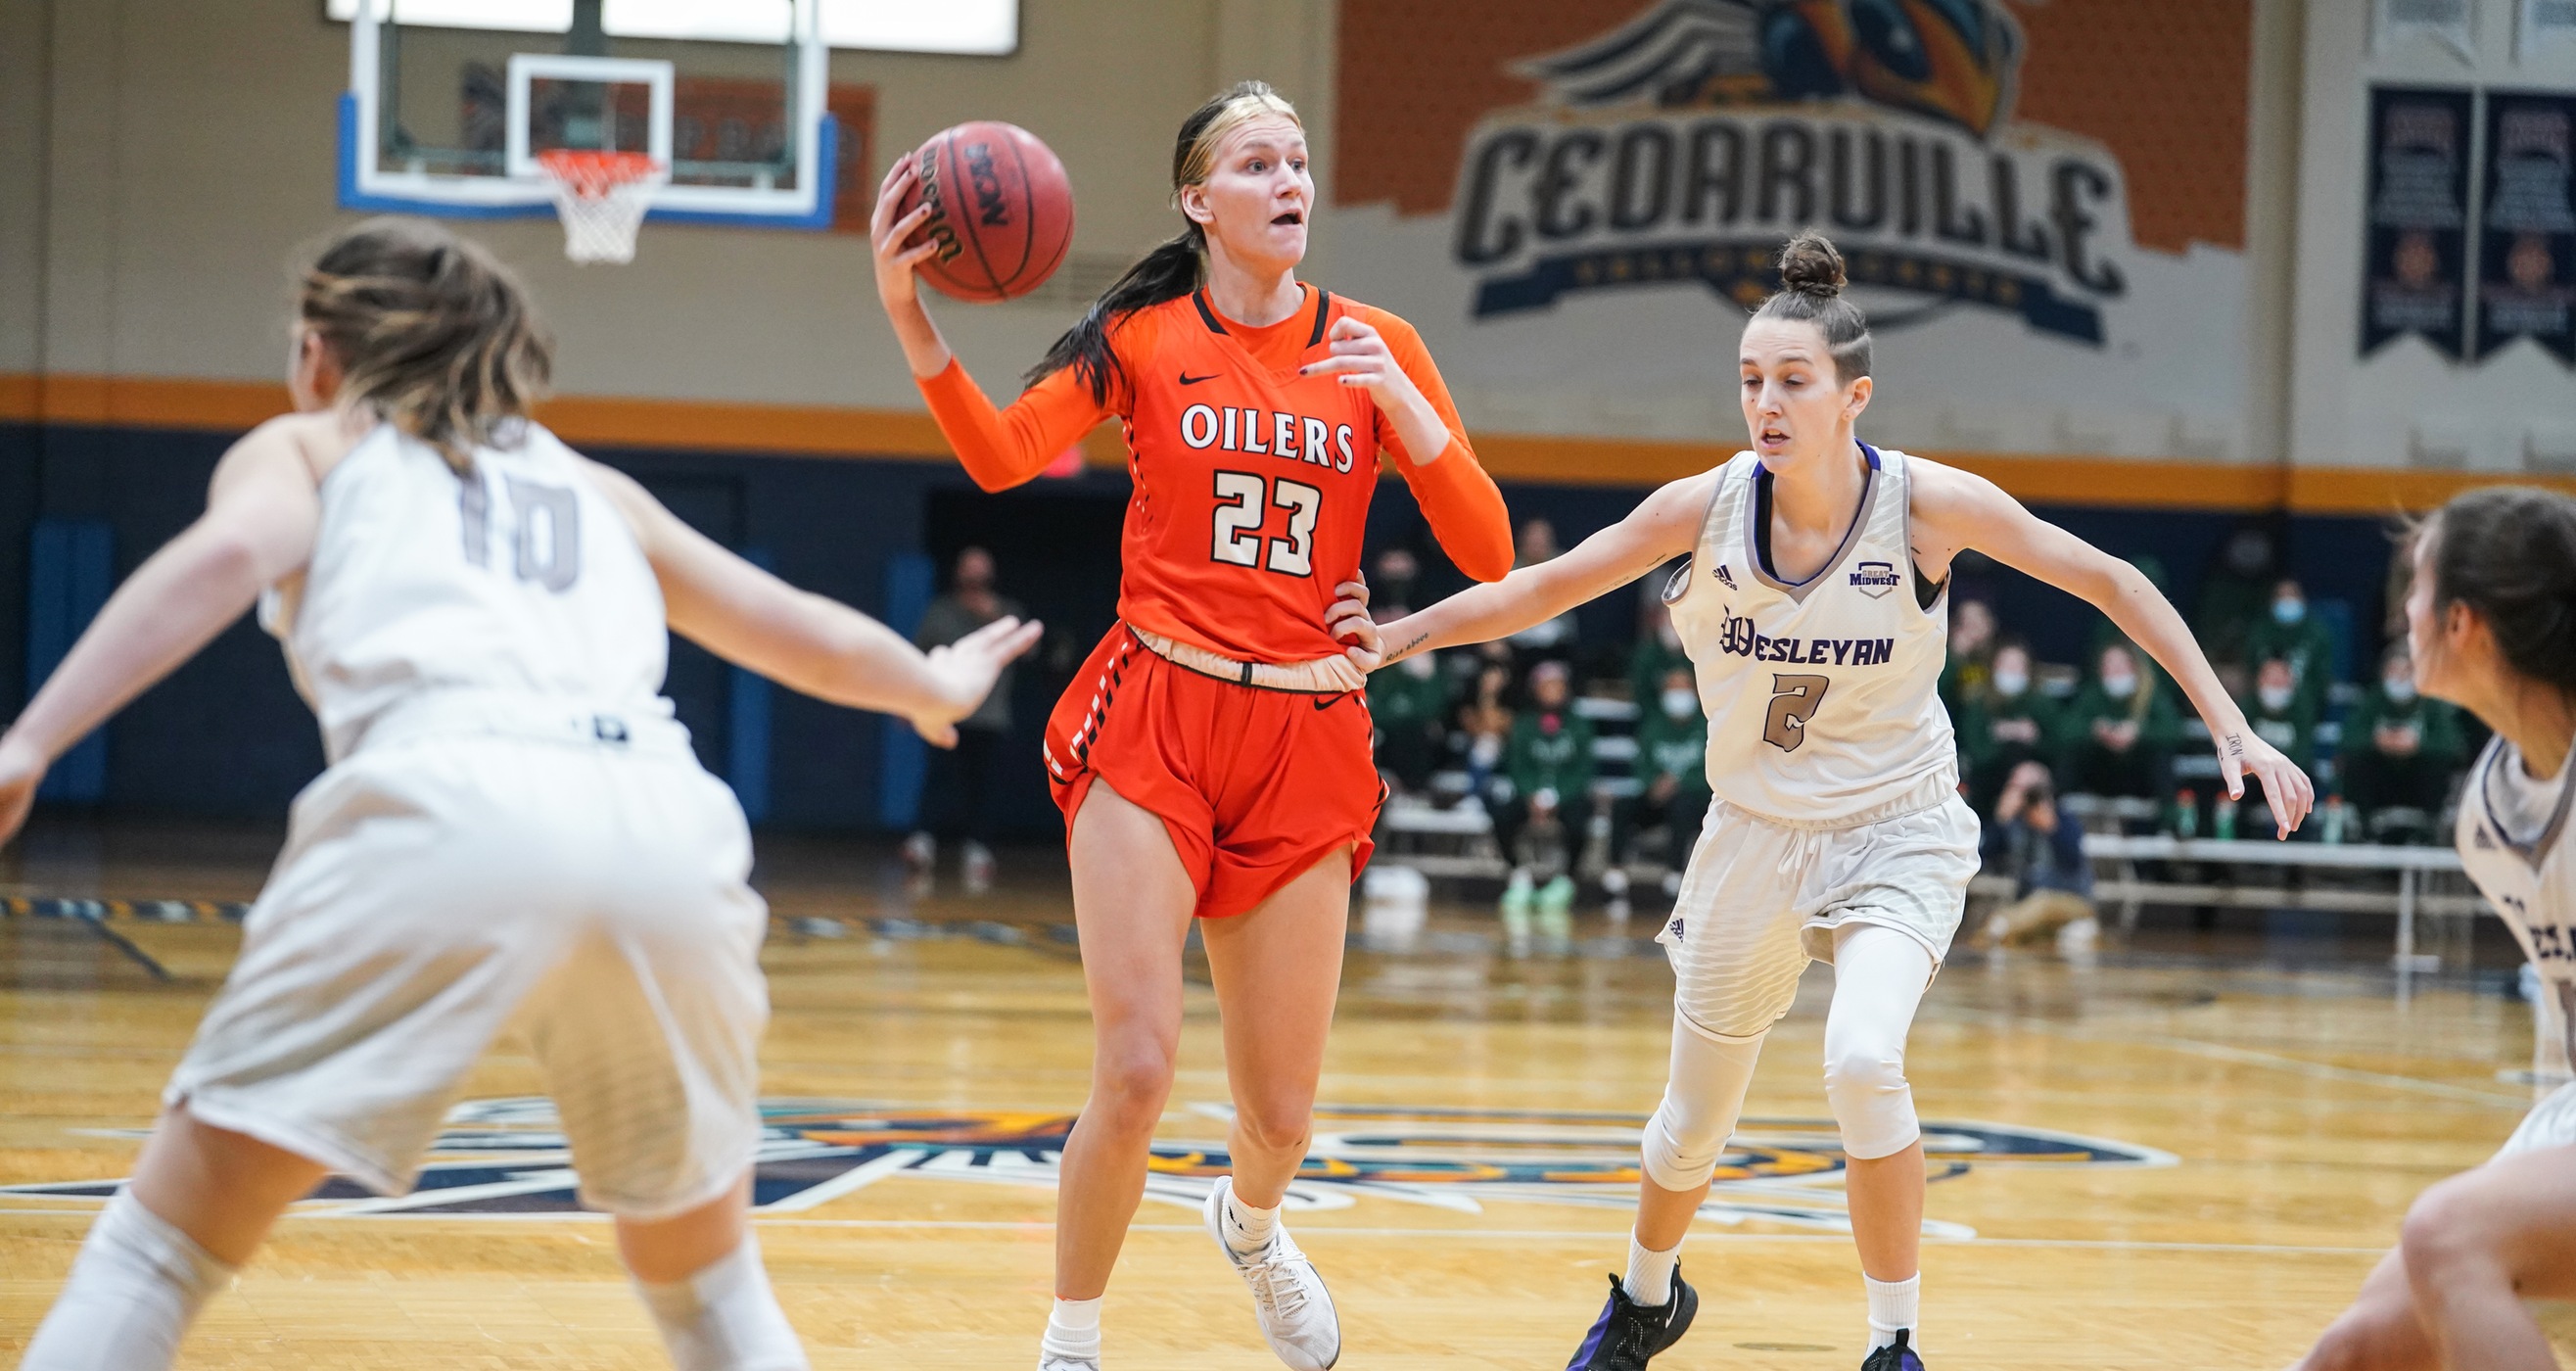 Oilers Bow Out in G-MAC Semifinals | Kin Sets Single-Season Scoring Record